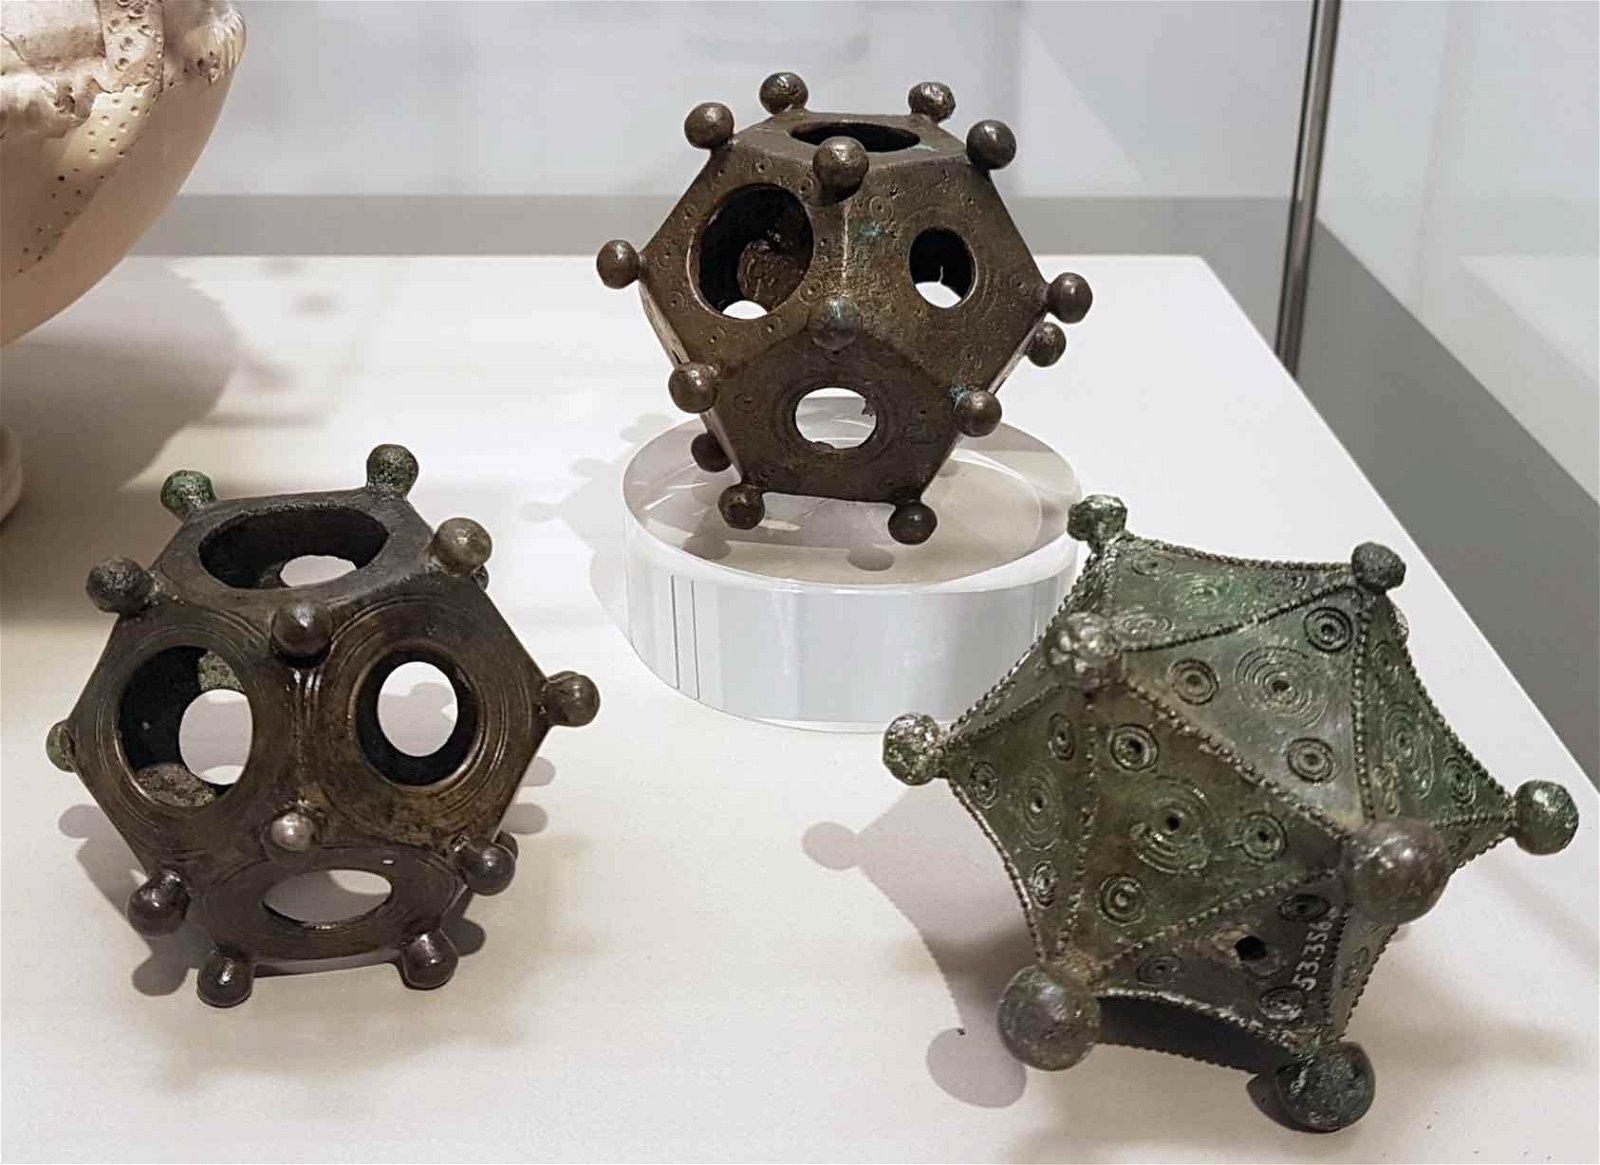 Roman dodecahedrons